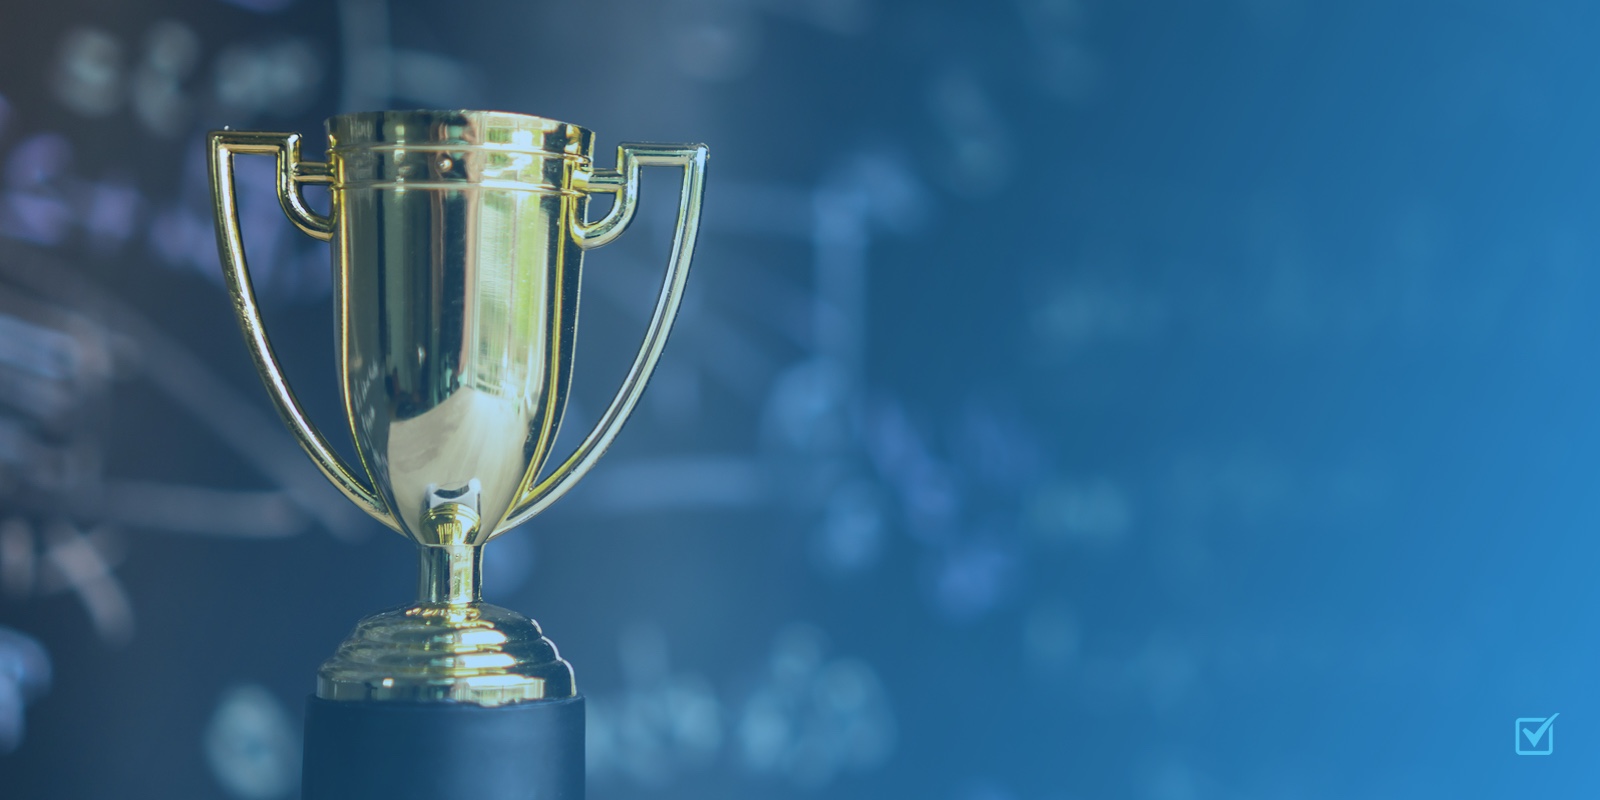 Post Award Grant Management: What To Do After Giving Awards (Checklist Included)